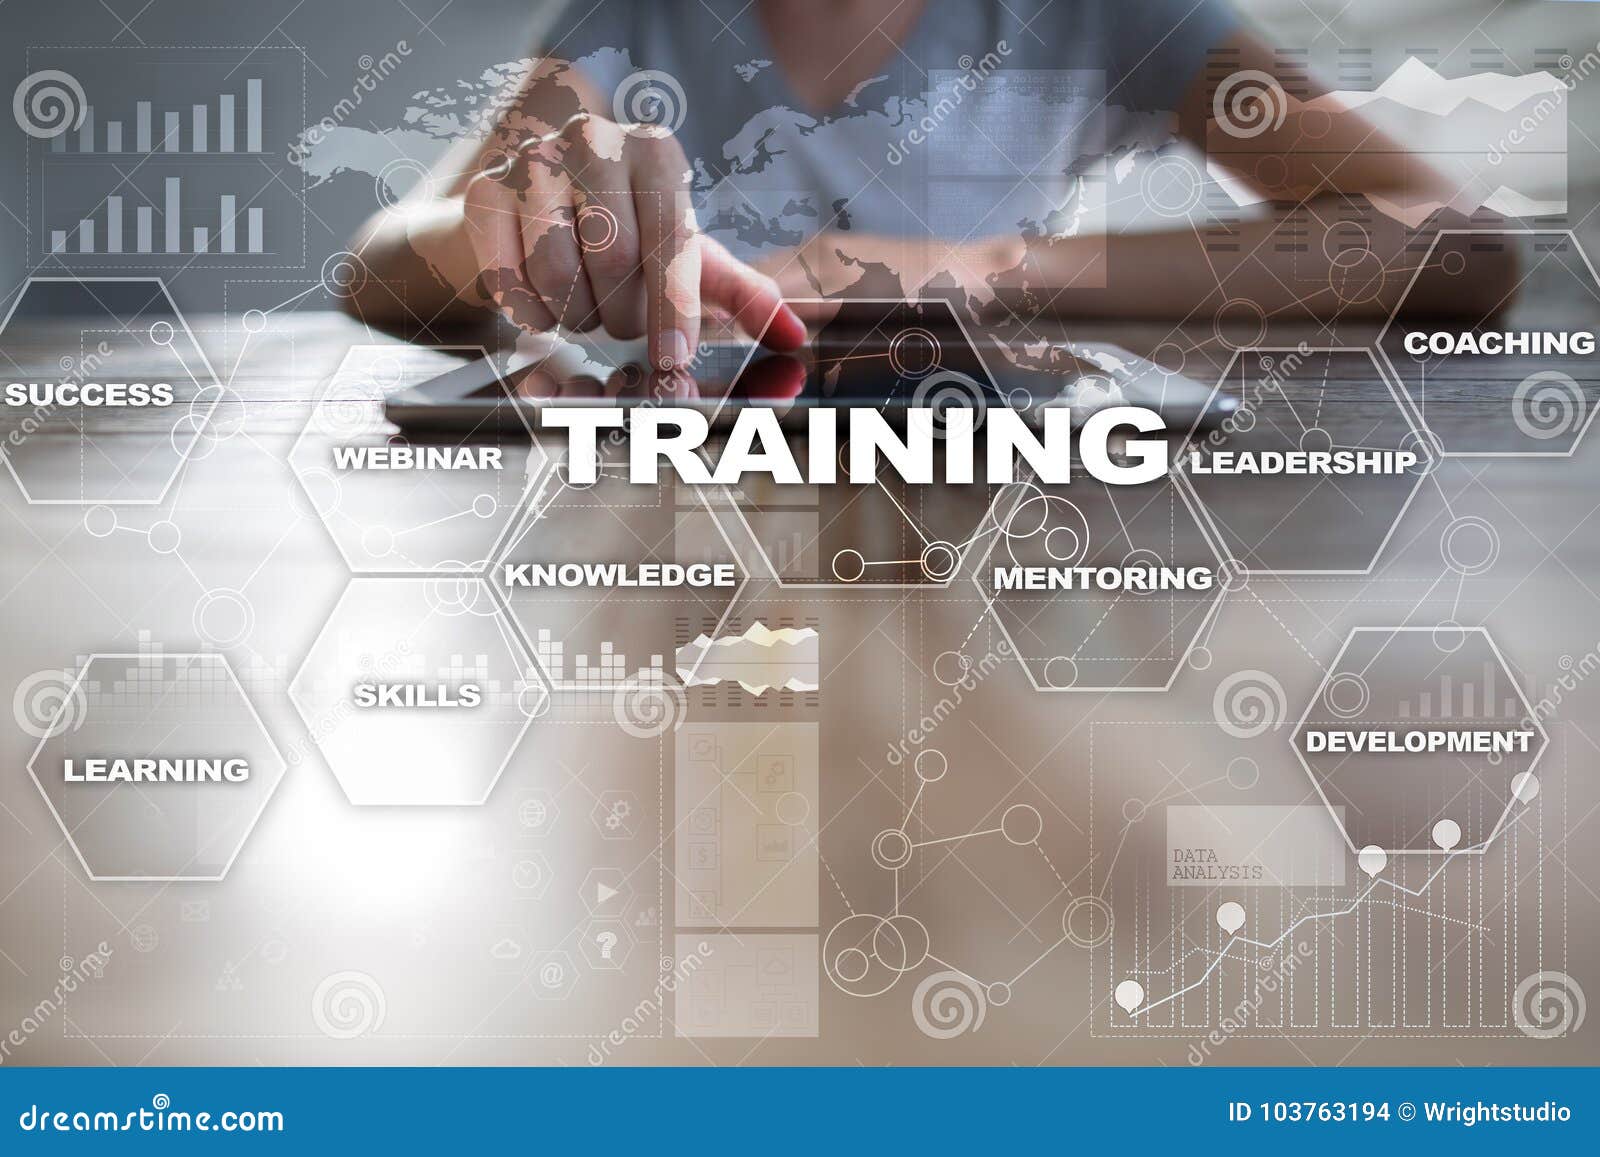 Training And Development Professional Growth Internet And